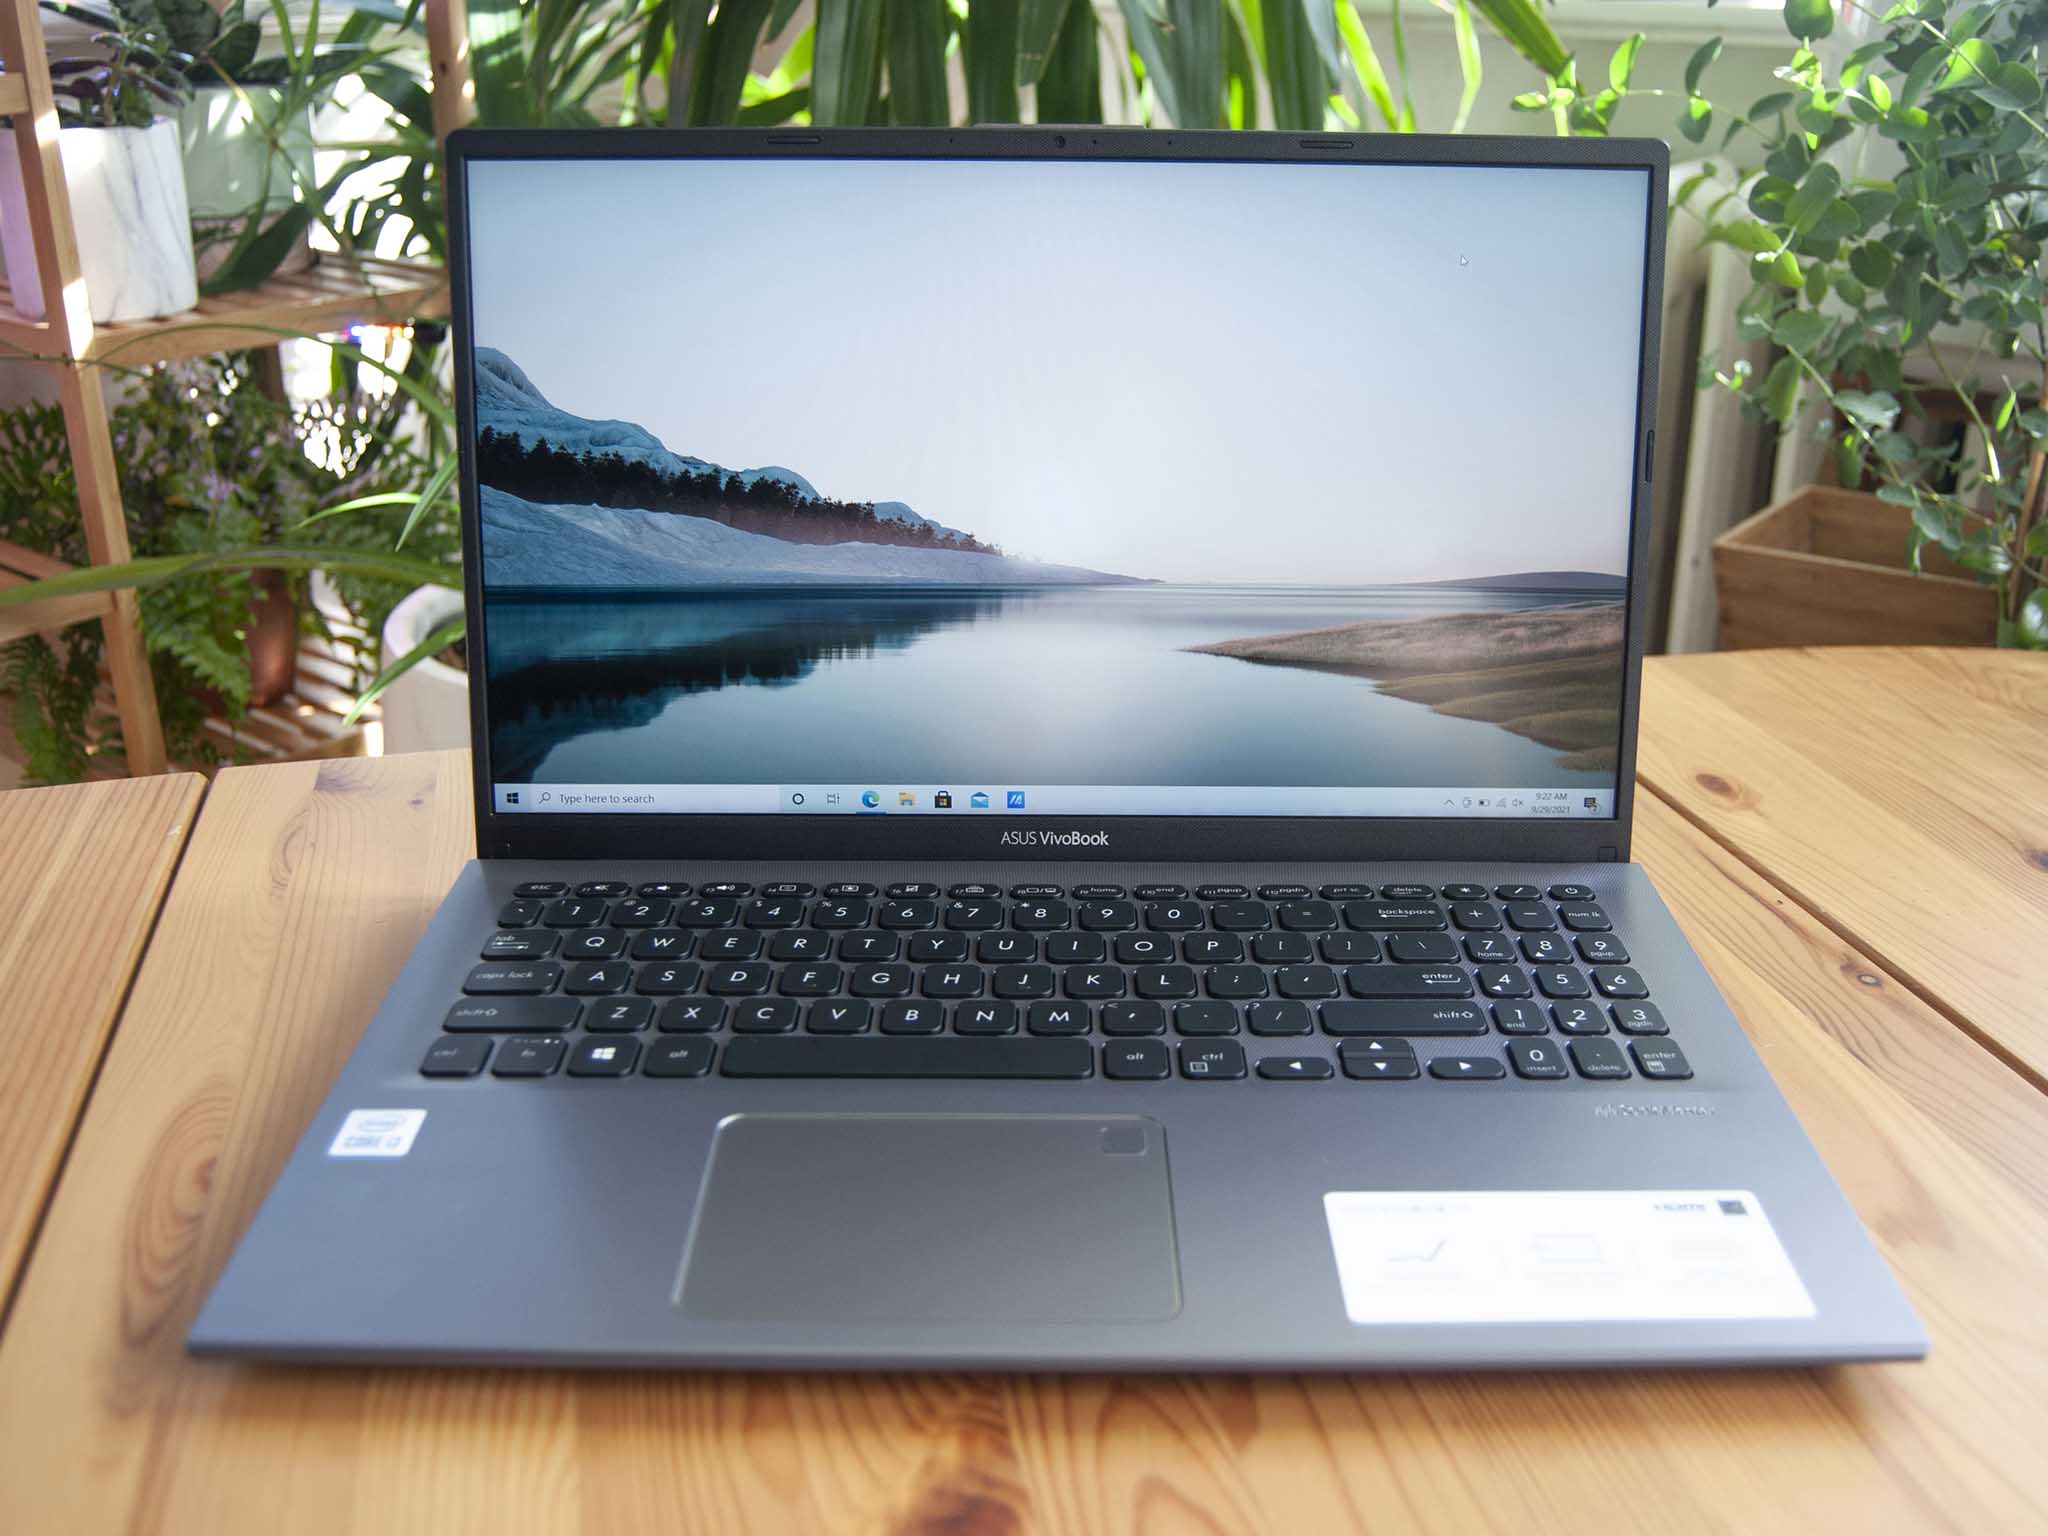 ASUS VivoBook 15 review: One of the best sub-$500 laptops